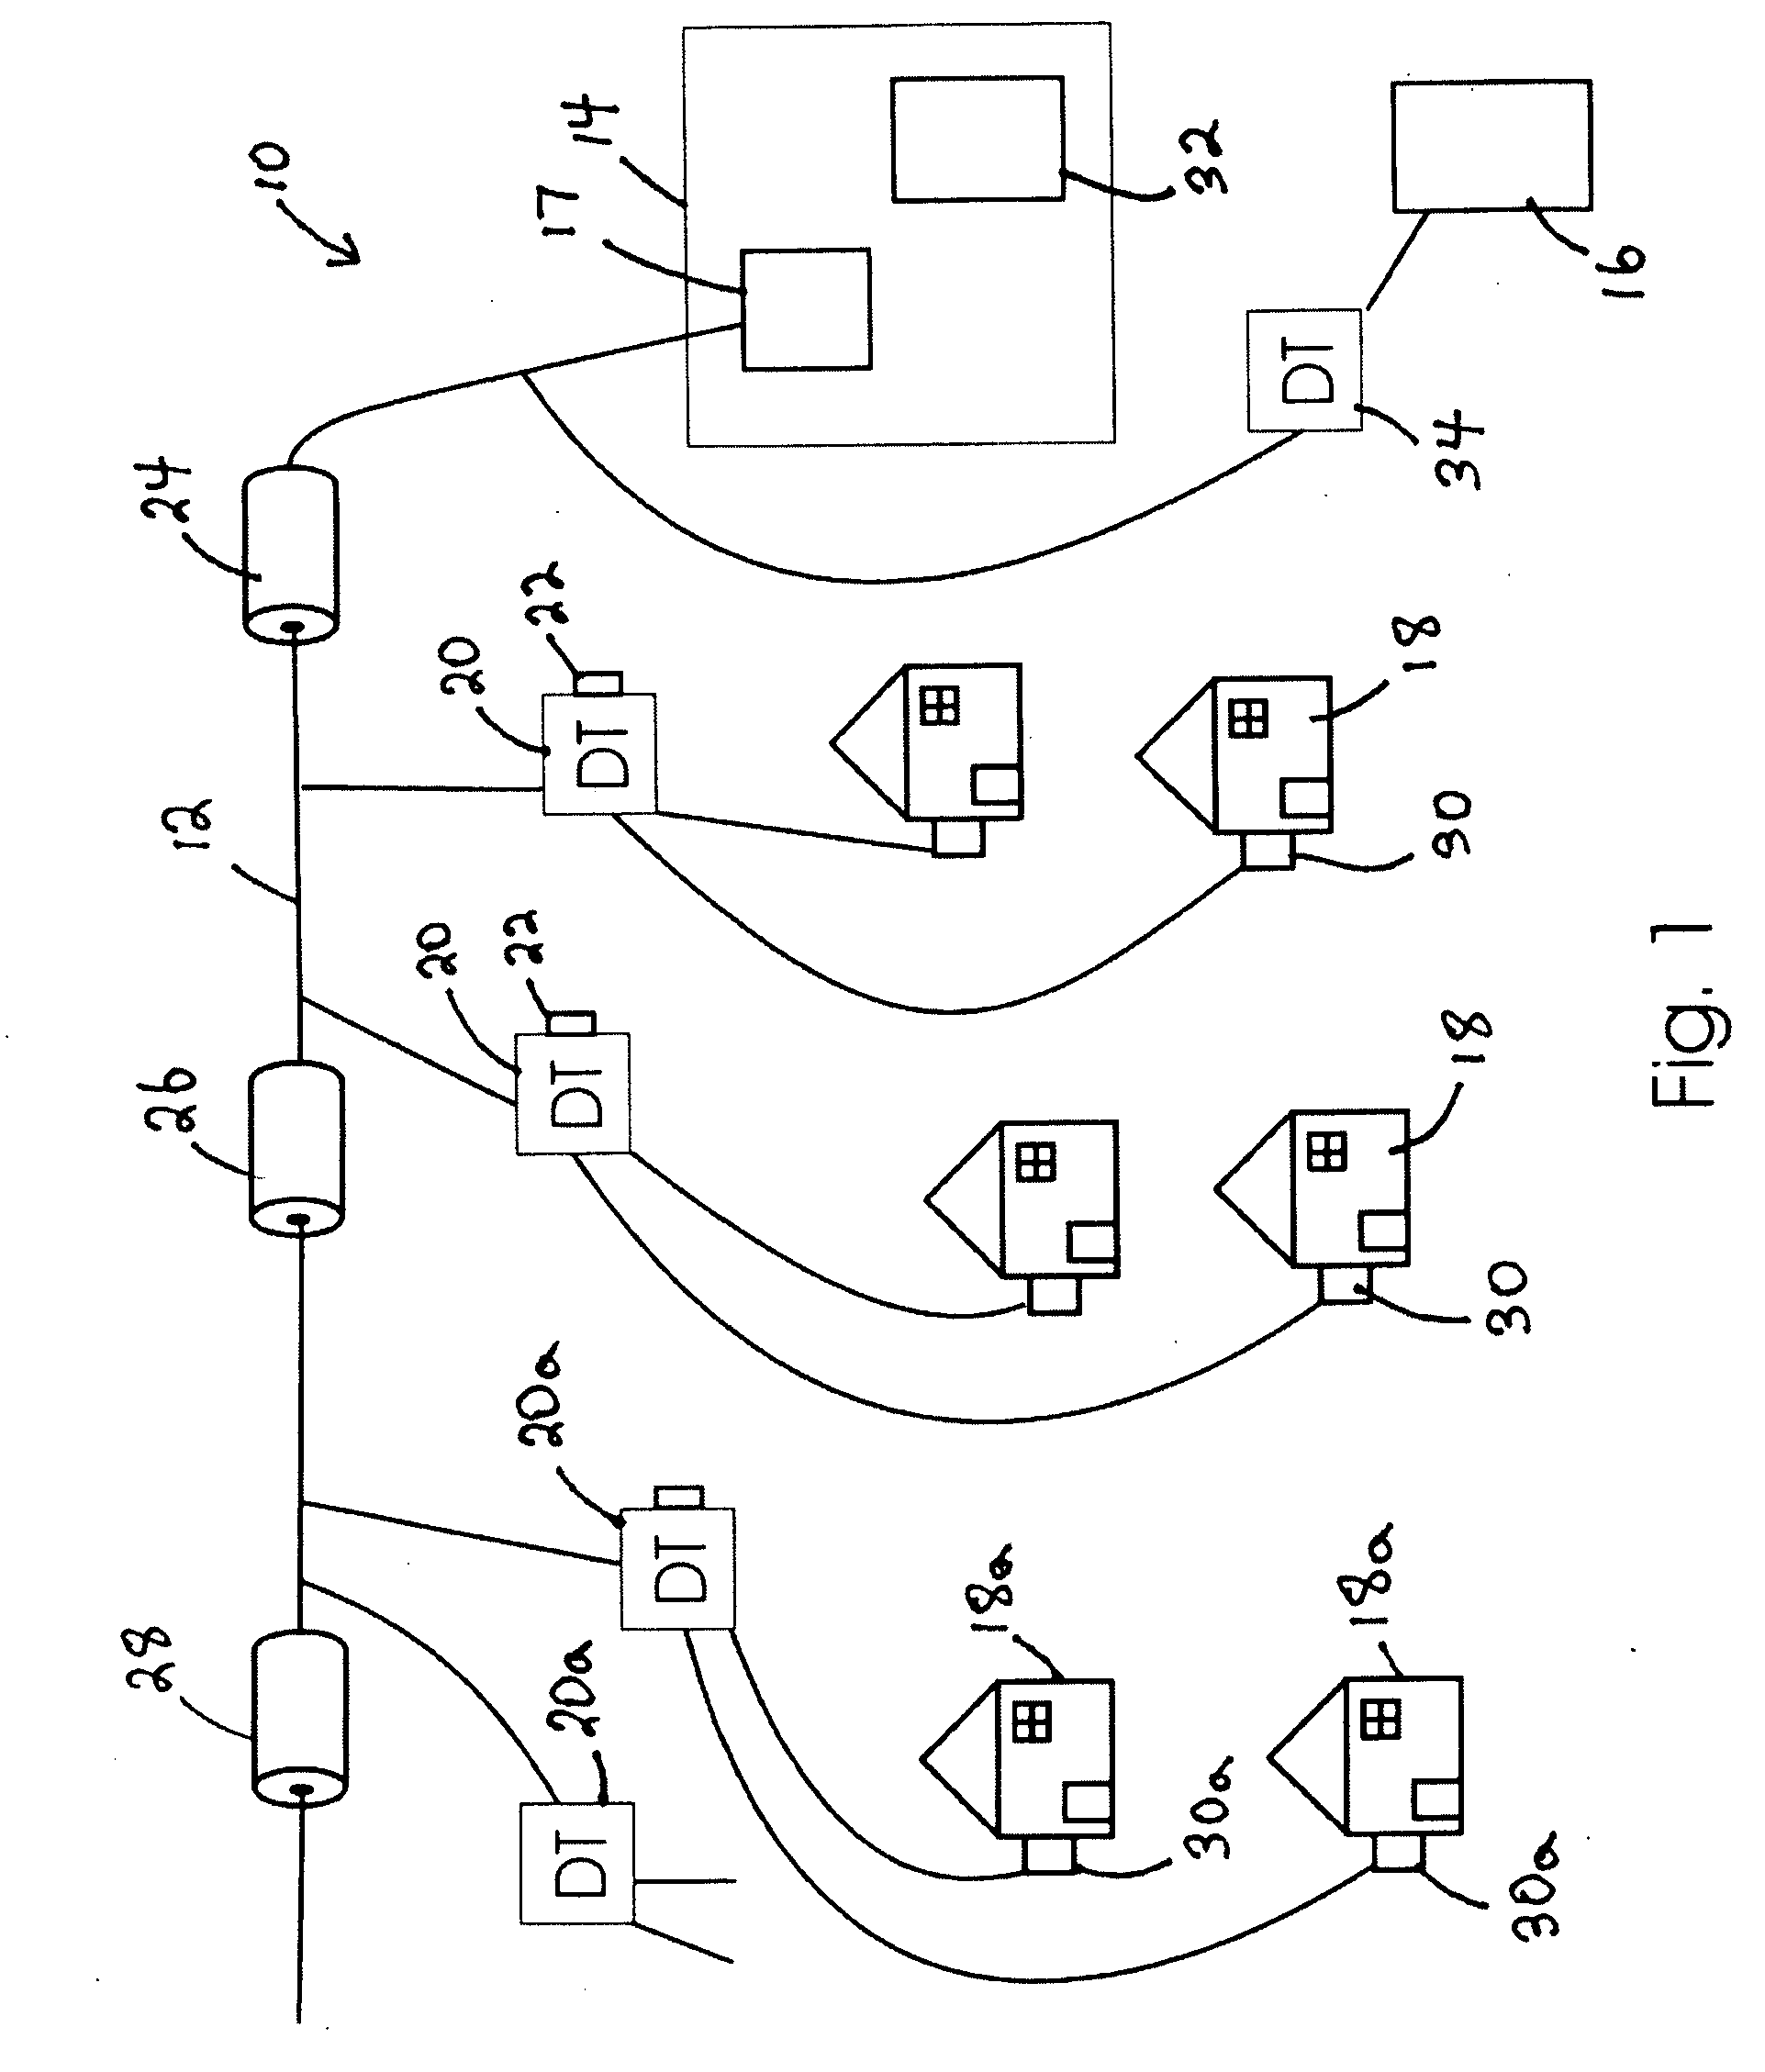 System for Automatically Detecting Power System Configuration